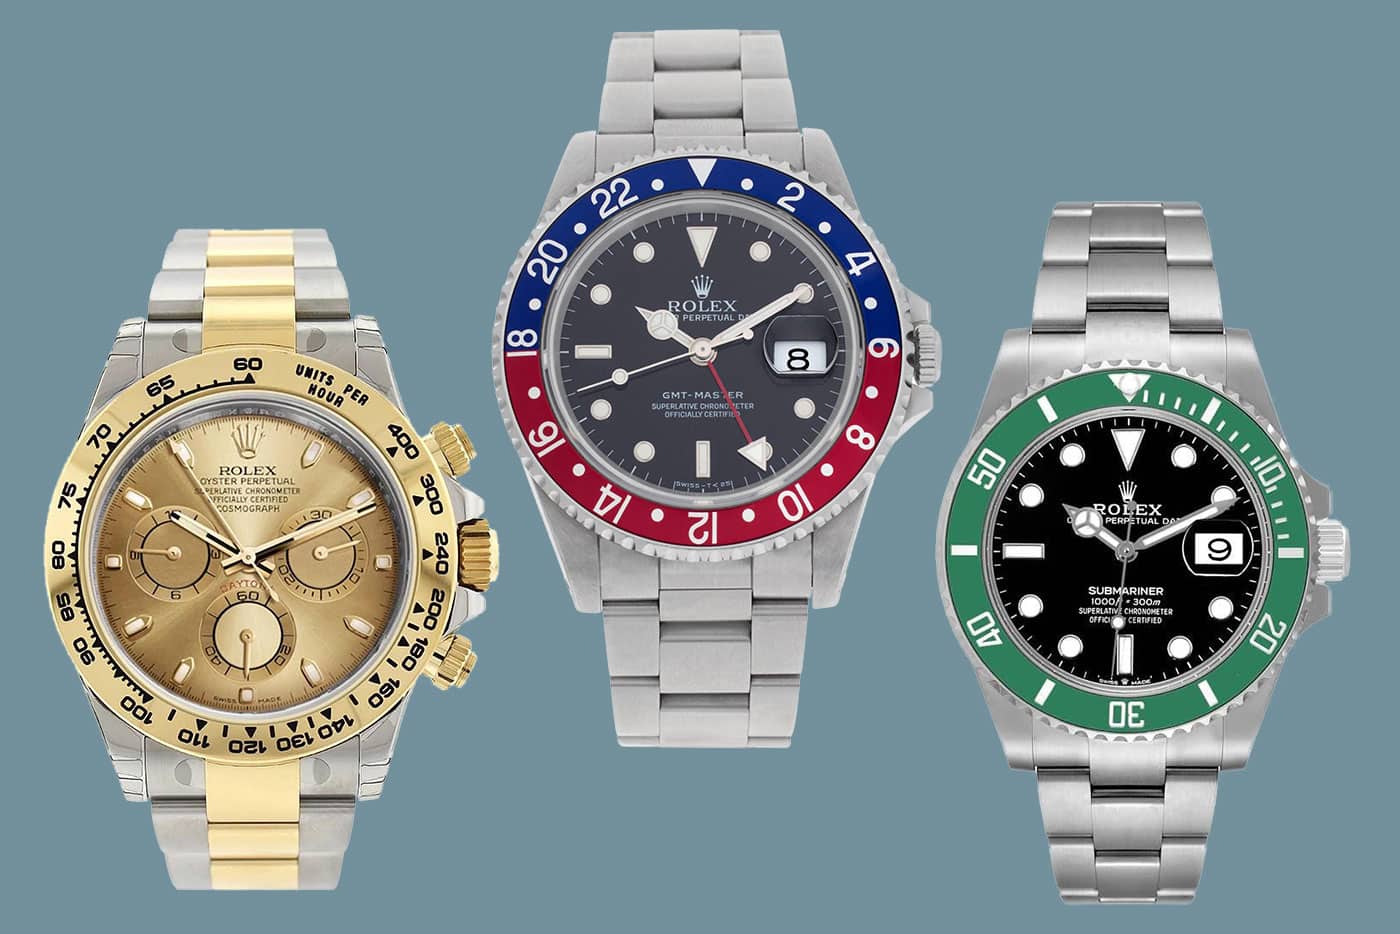 Rolex Buying Guide: Everything You Need to Know about Choosing the Right Watch